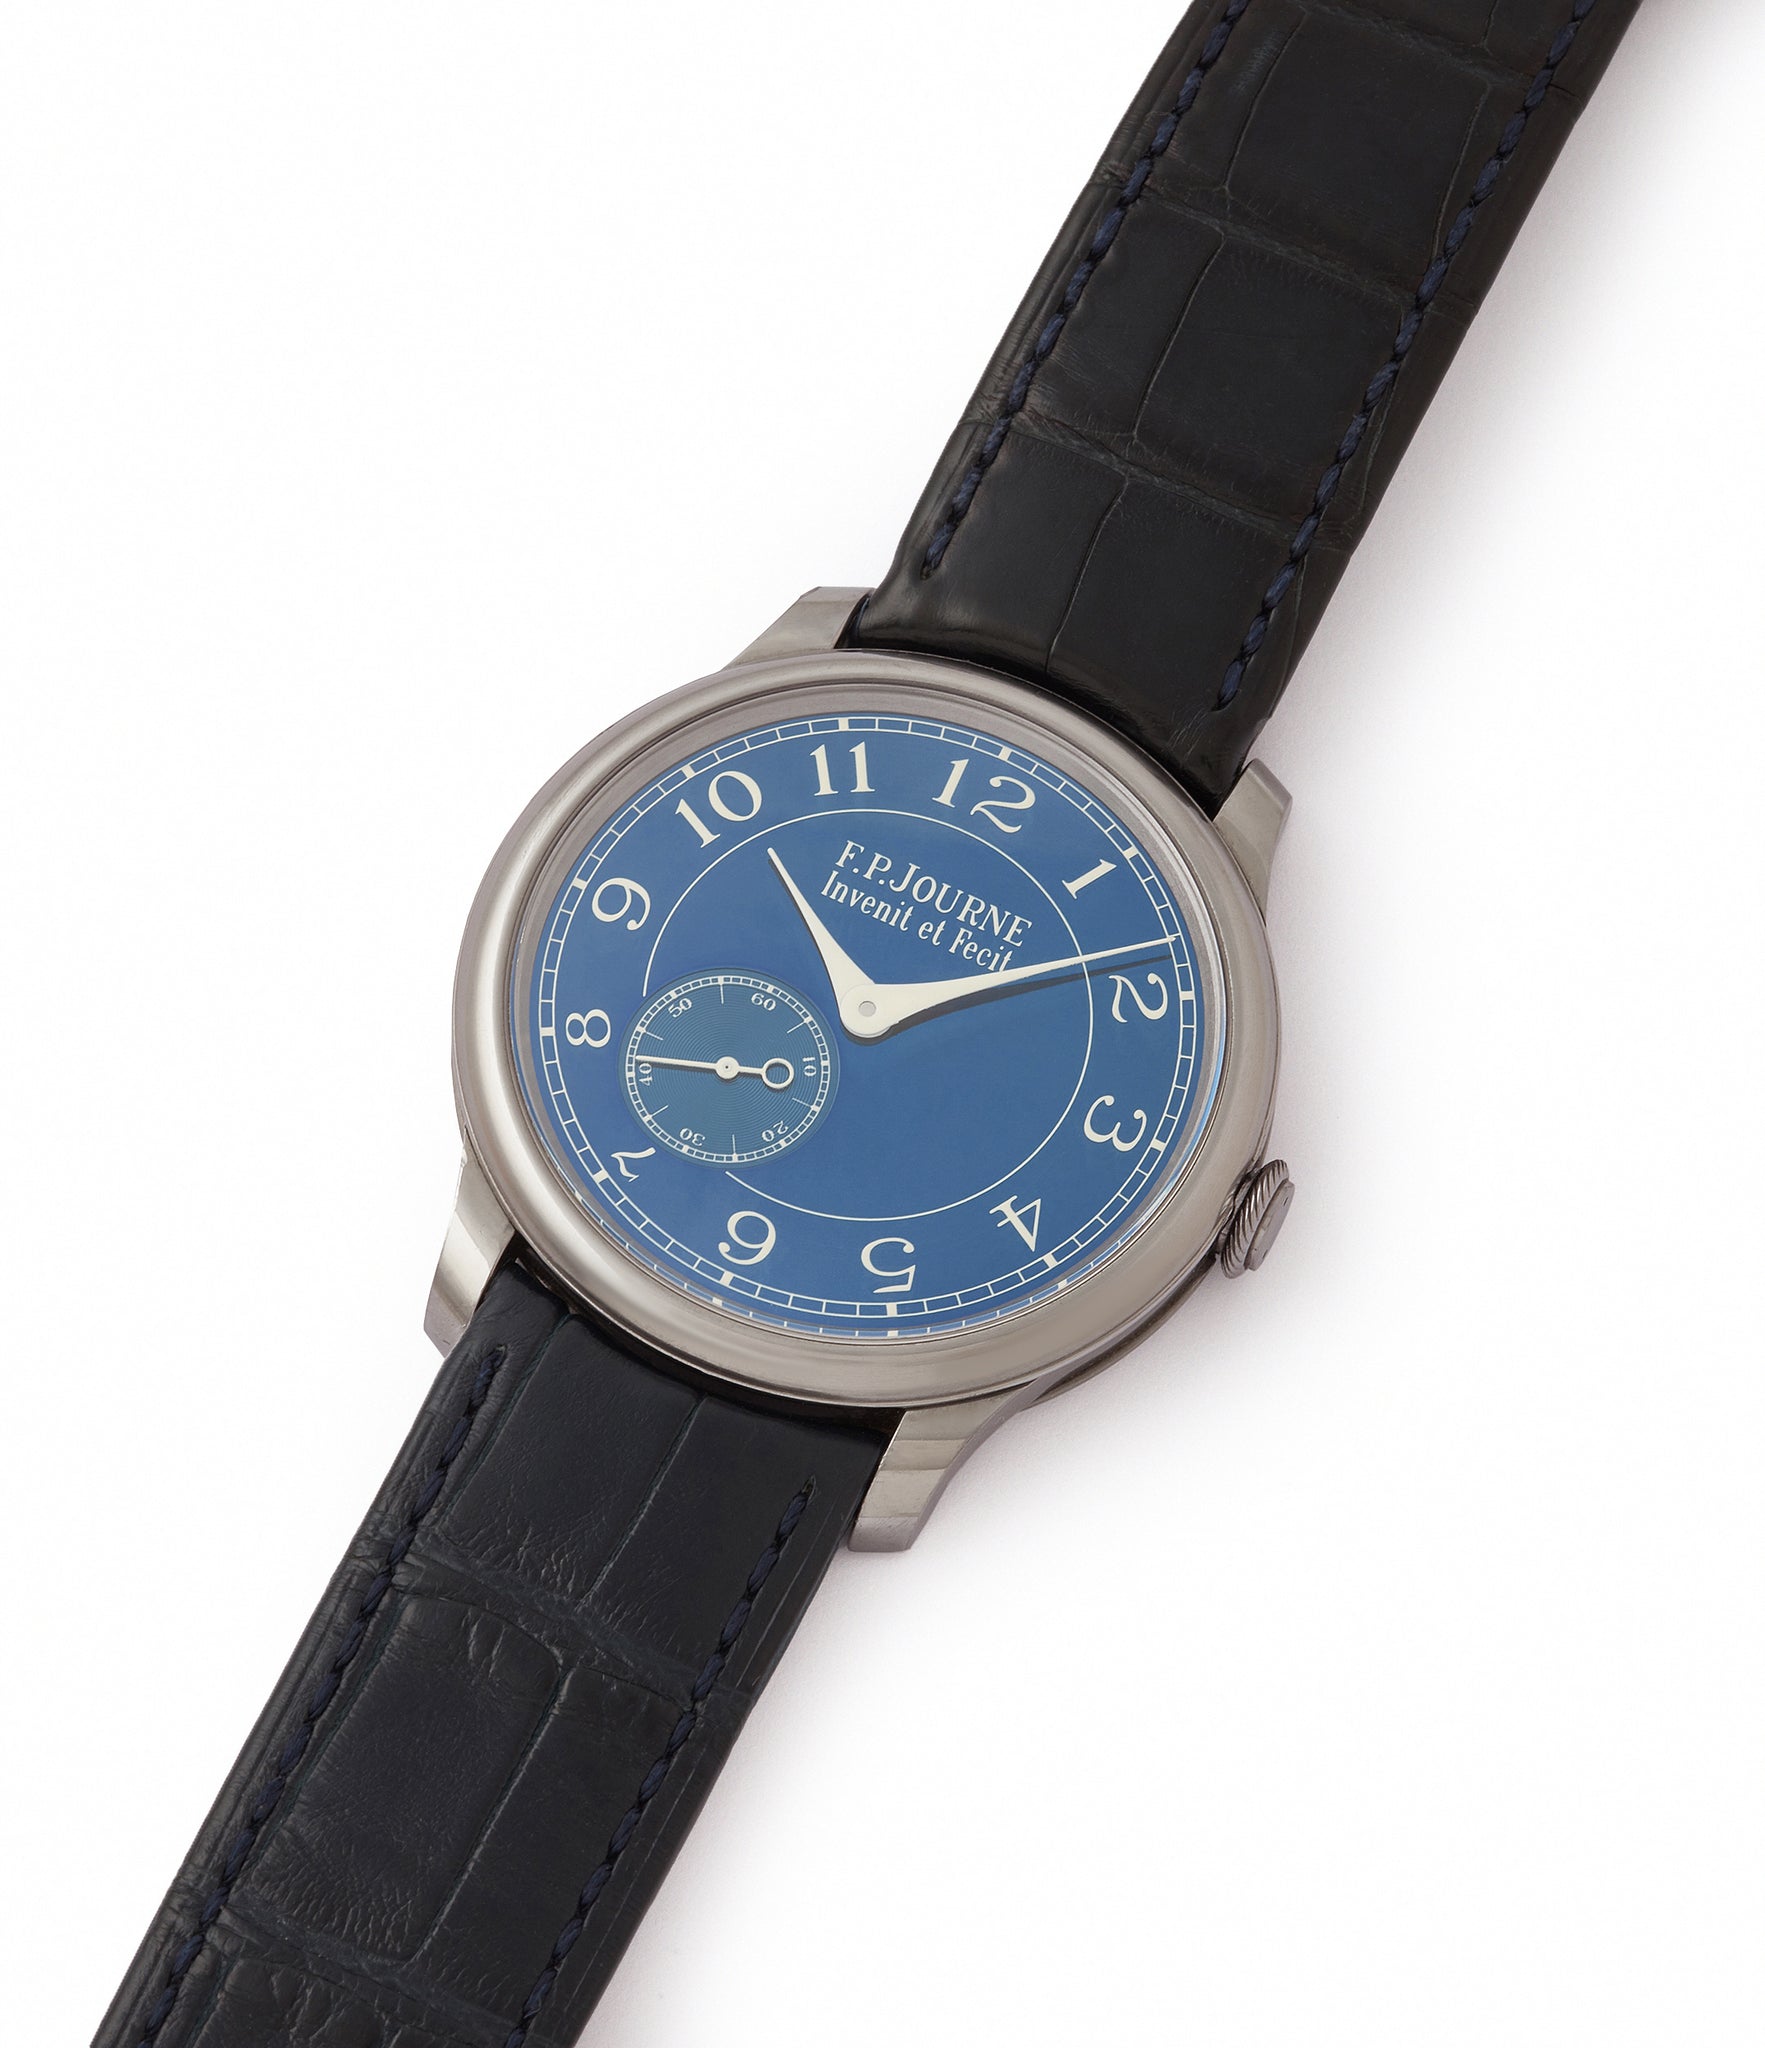 buy pre-owned F. P. Journe Chronometre Bleu tantalum blue dial watch independent watchmaker for sale online at A Collected Man London UK specialist of rare watches 